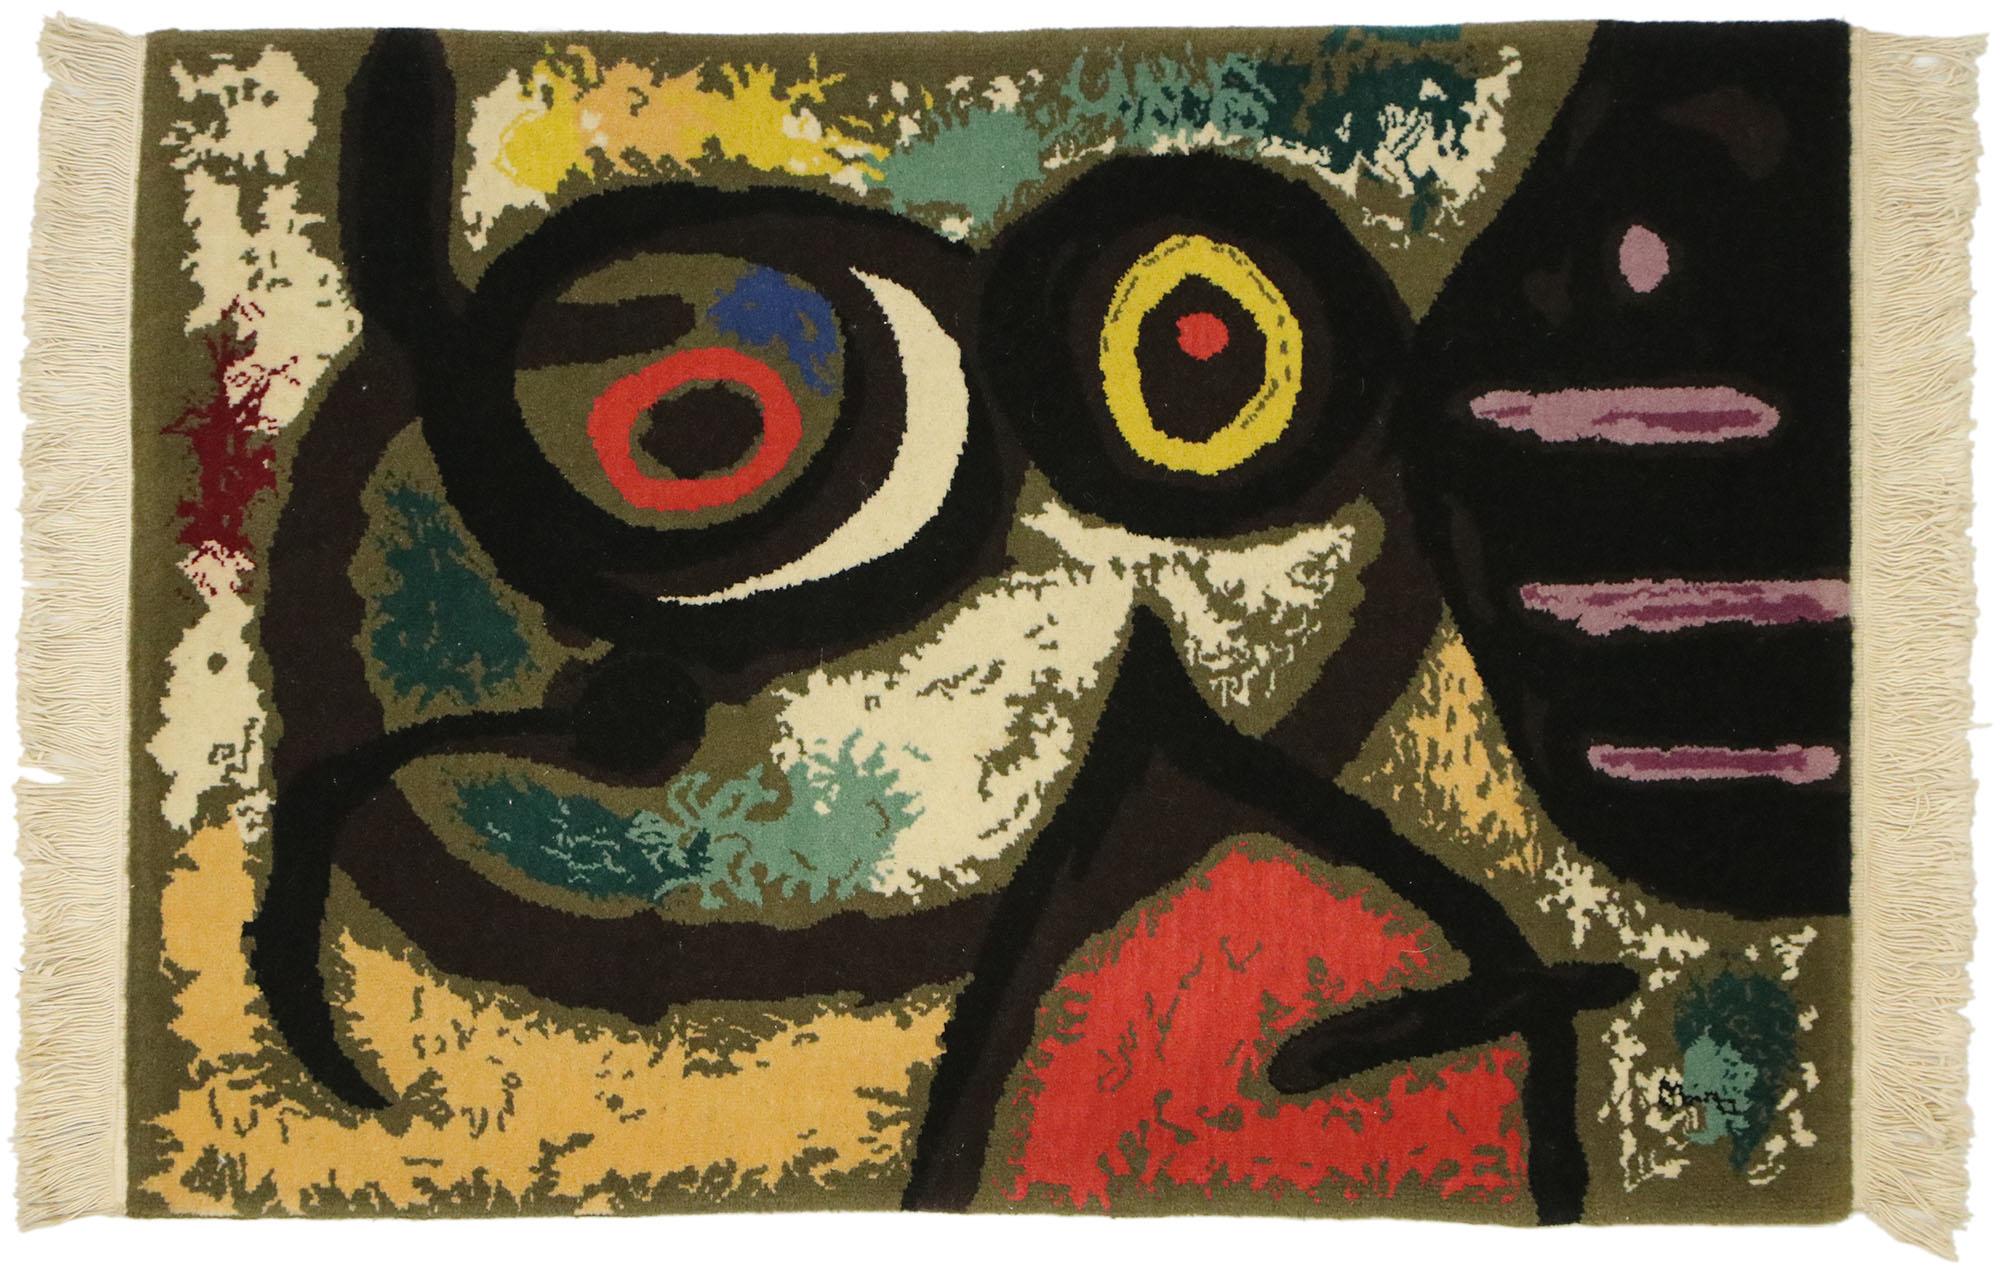 77100 A Surrealist tapestry inspired by Joan Miro's 'Femme et Oiseaux' woman and birds, 1966. The painting was the last of a series the artist completed in Barcelona just after the Nazi occupation of France. Miro used his painted to escape from the